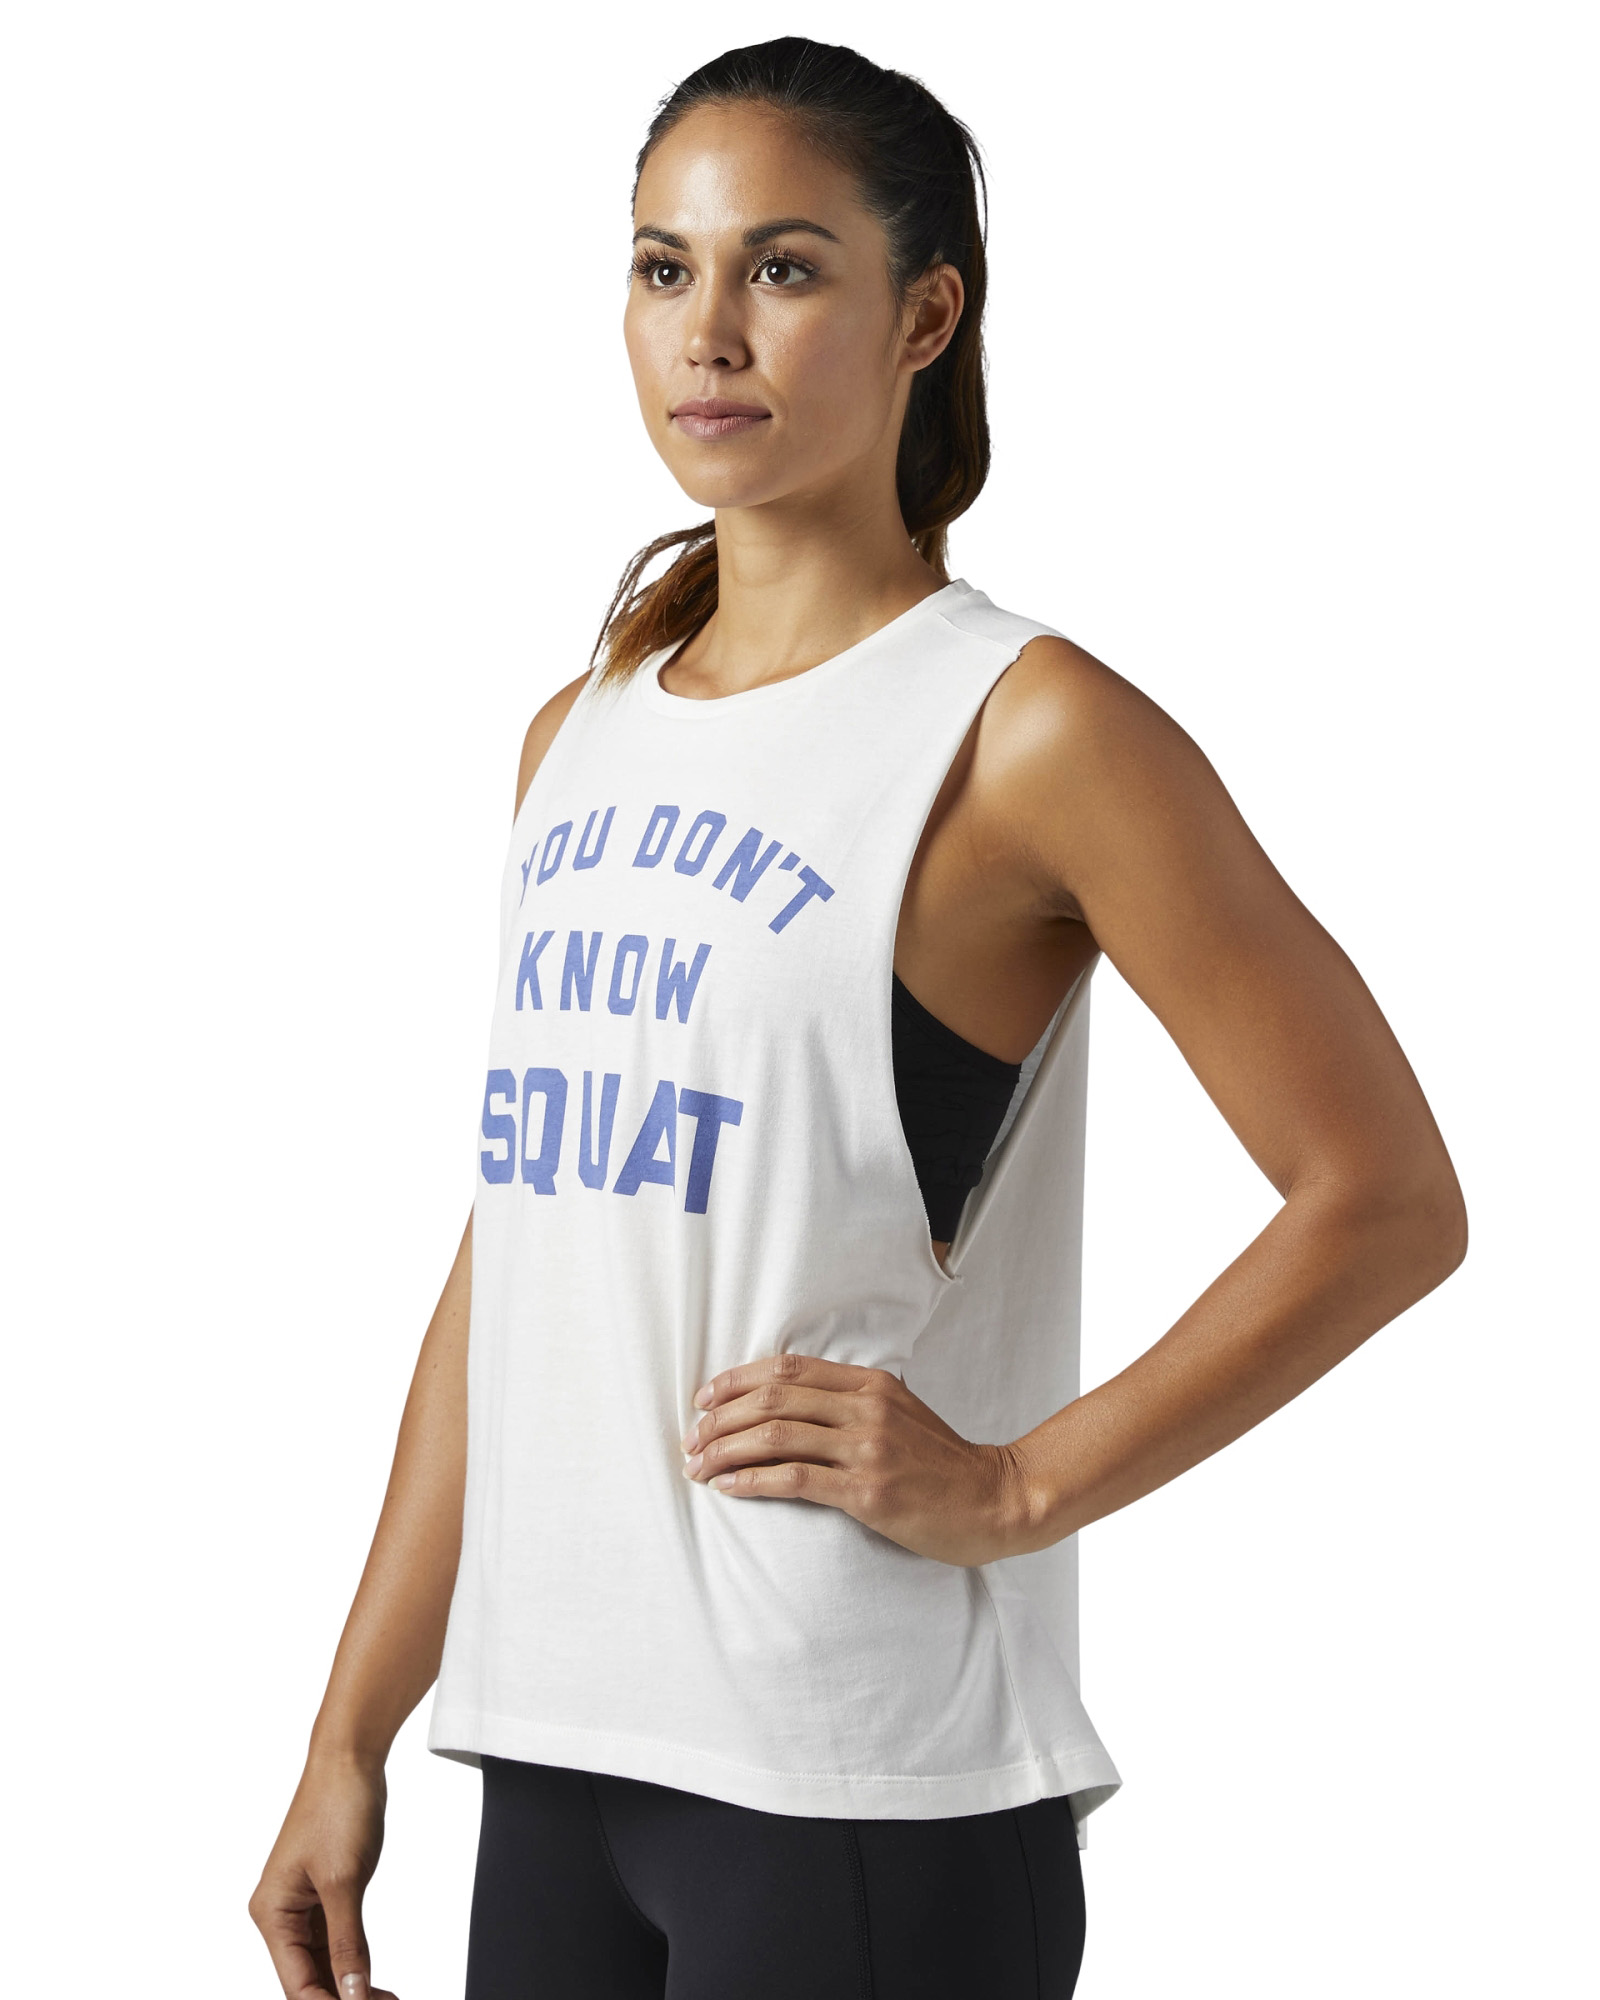 You Dont Know Squat- Muscle Tank